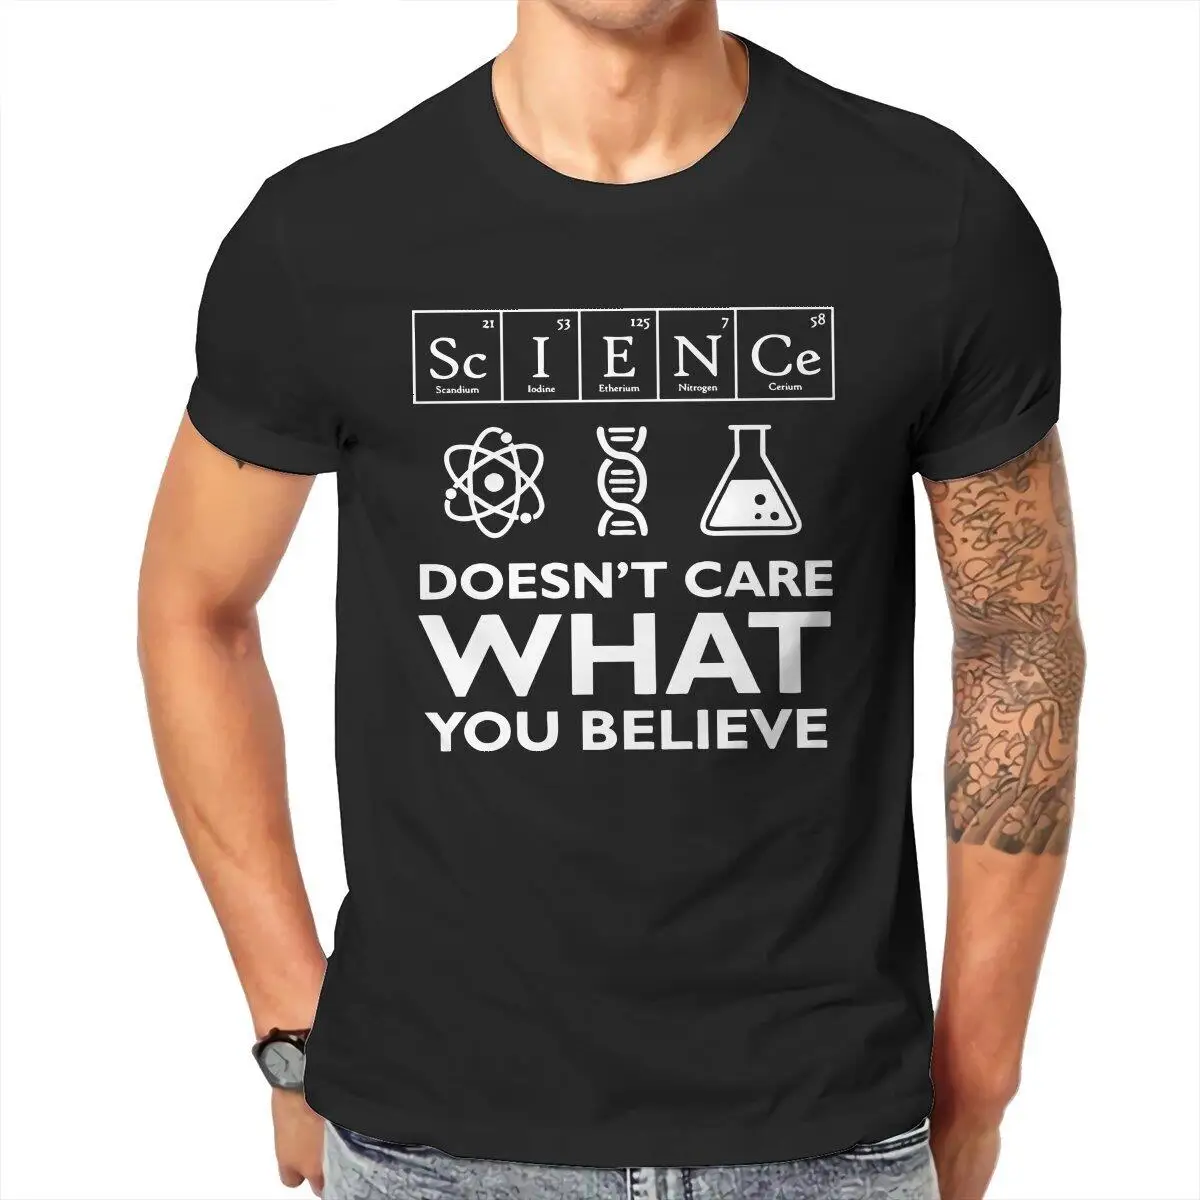 Men Science Doesn't Care What You Believe T Shirt Cotton Clothing Scientist Biology Physics Chemistry Astronomy Tees T-Shirts